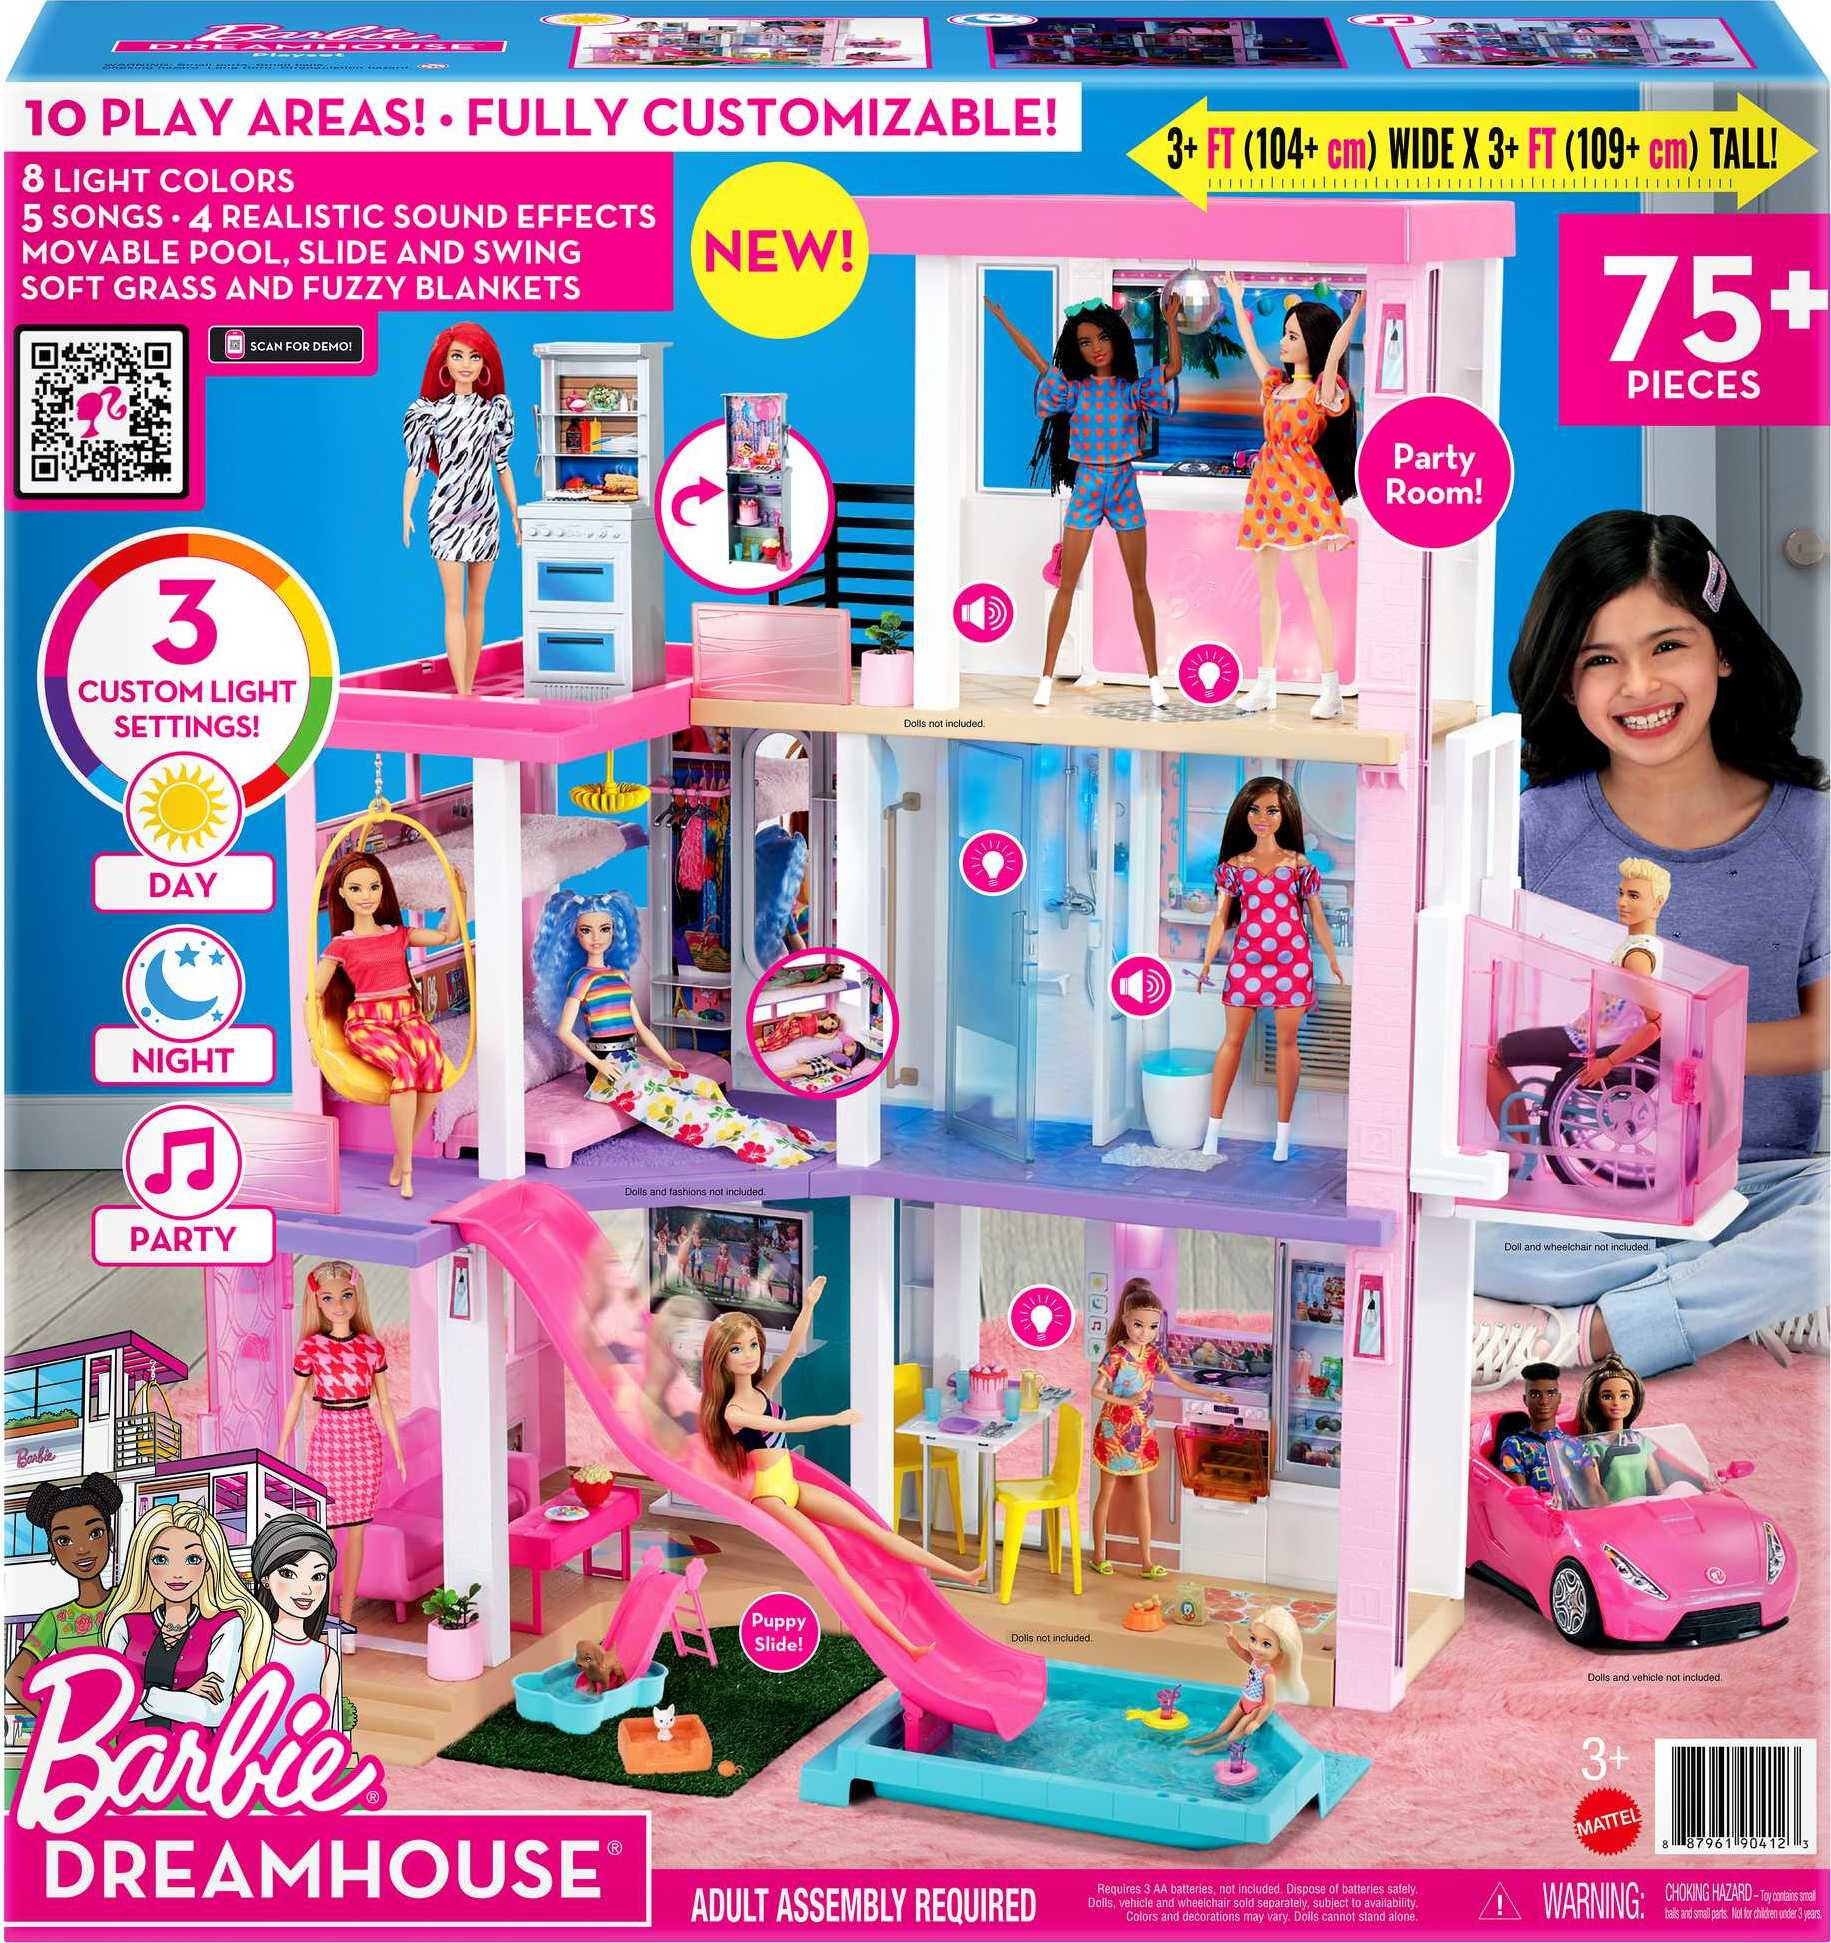 Barbie DreamHouse Playset with 10 Play Areas, 75+ Furniture & Accessories, Lights & Sounds - image 6 of 8